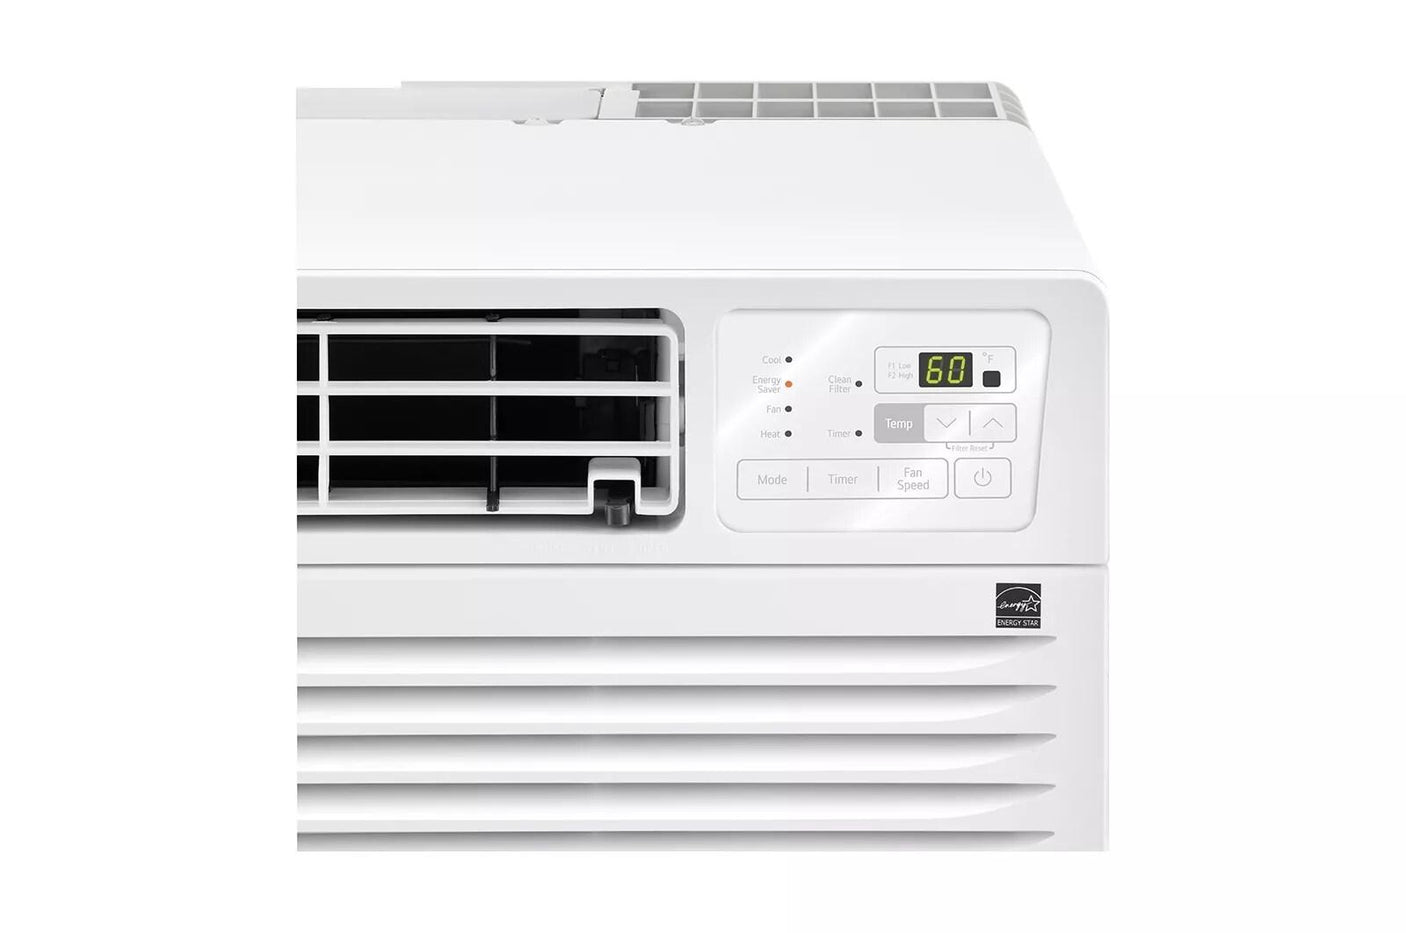 11,500/11,800 BTU Through-the-Wall Air Conditioner with Heat